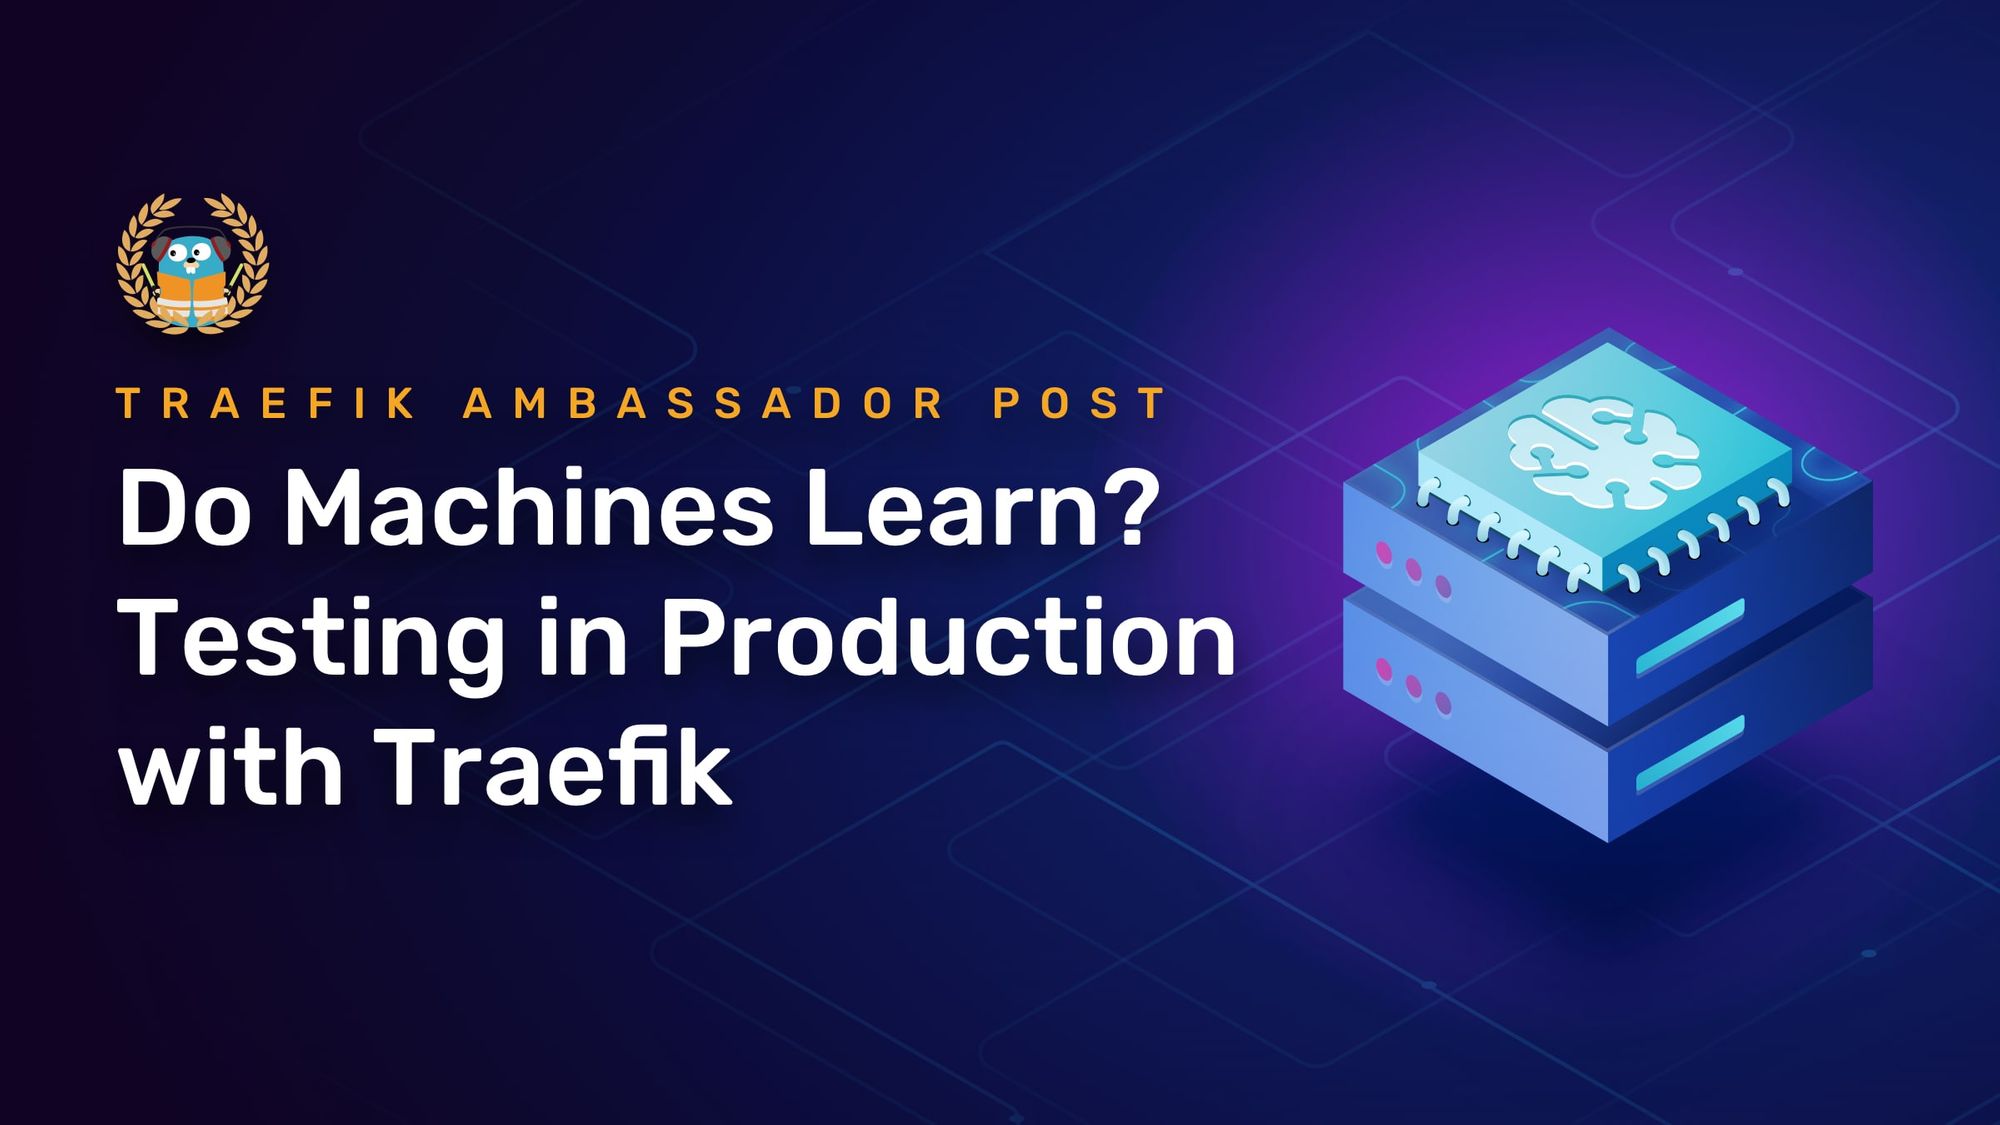 Do Machines Learn? Testing in Production with Traefik